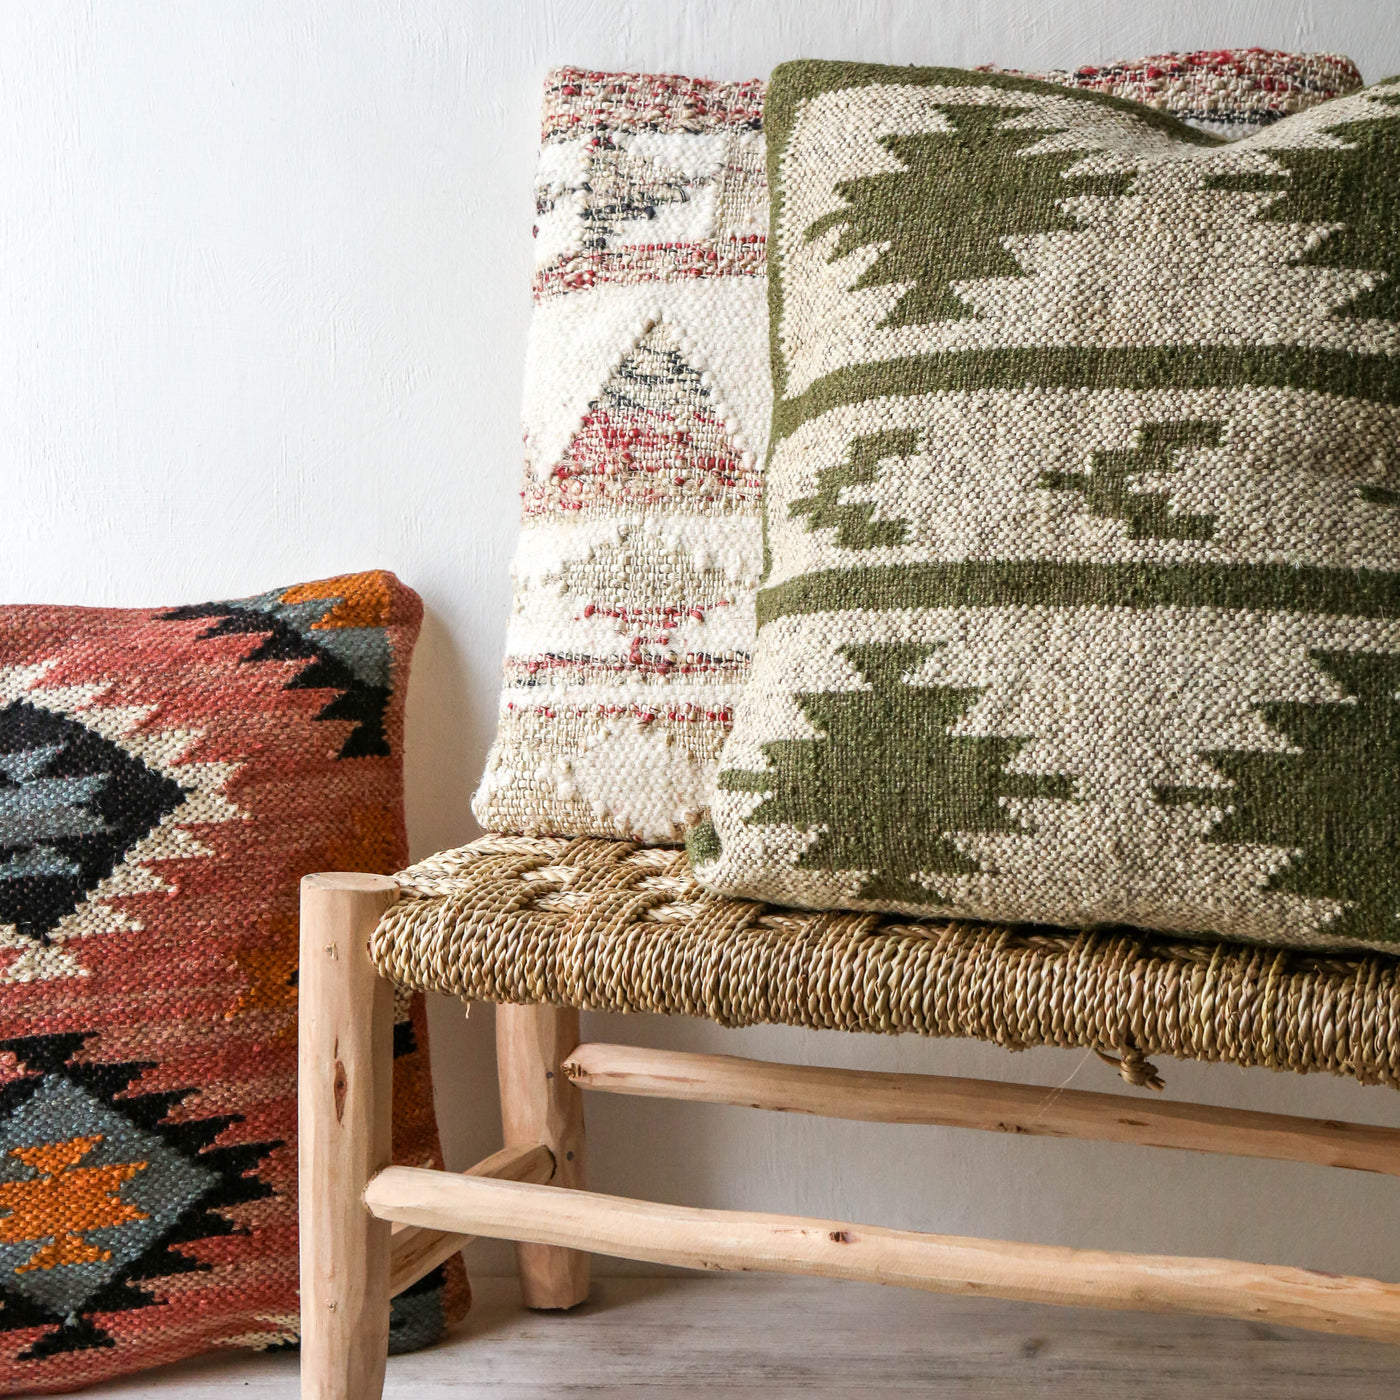 Nona Rustic Embroidered Cushion - Natural